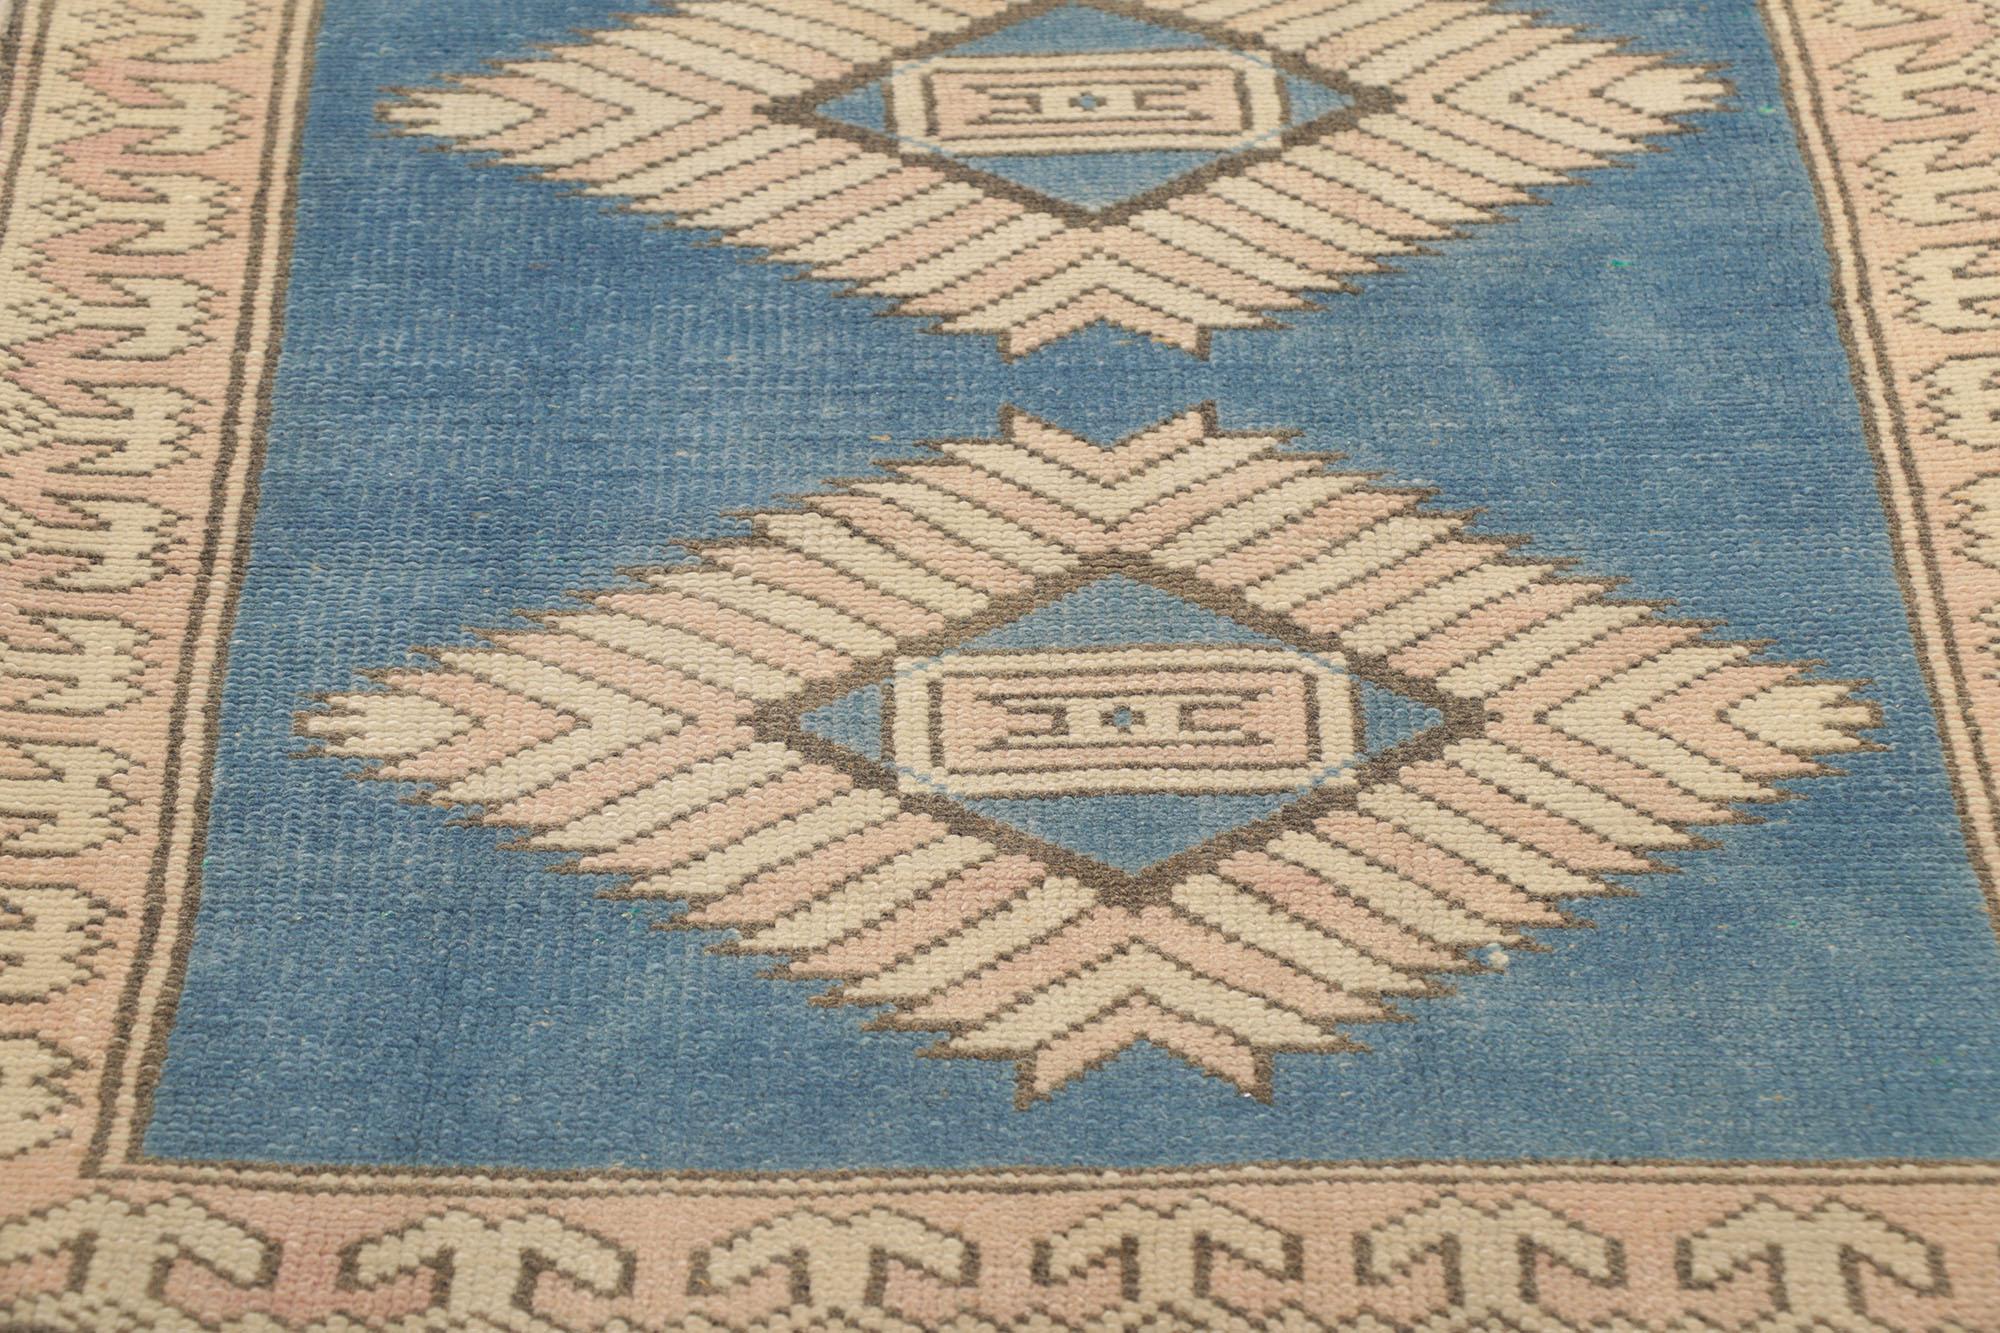 Vintage Blue Turkish Oushak Rug, Modern Boho Meets Sophisticated Nomad In Good Condition For Sale In Dallas, TX